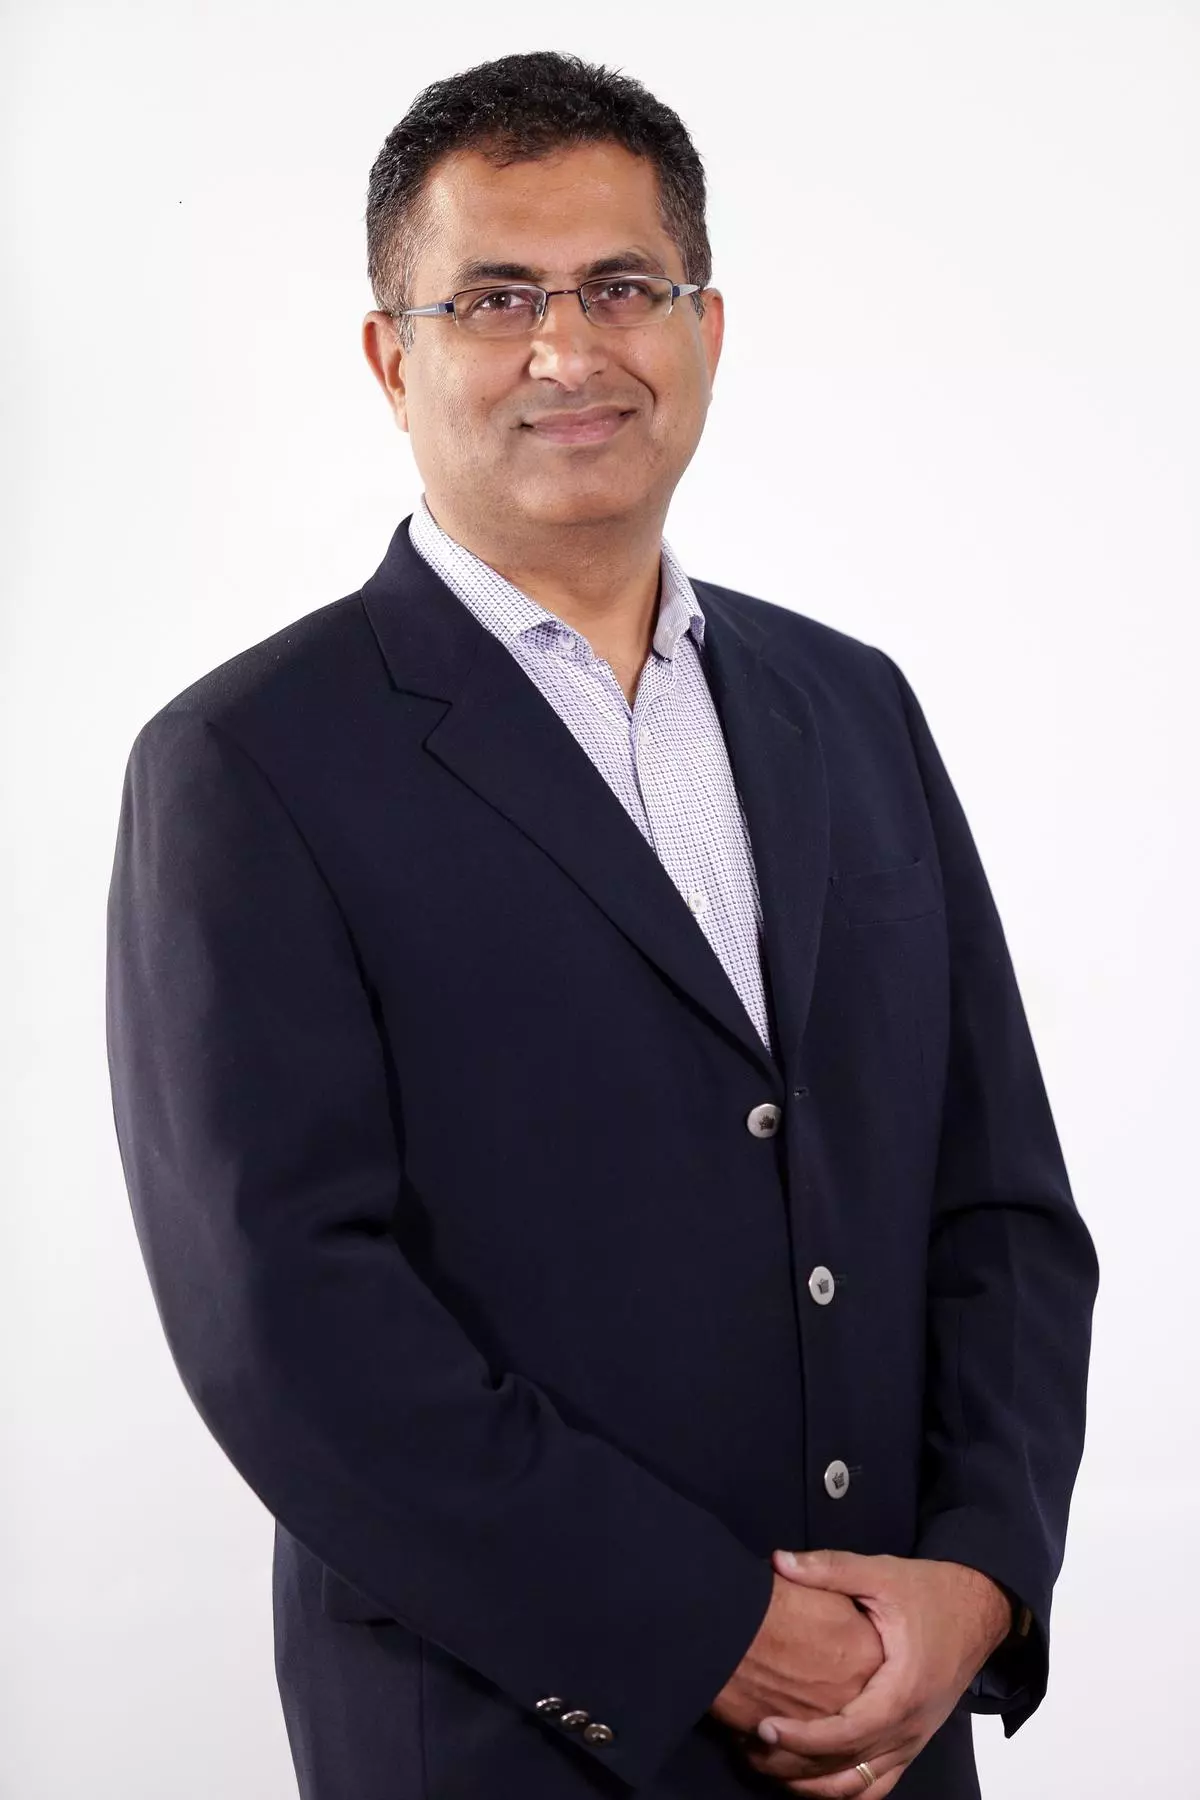 Manish Vyas, President, Communications, Media and Entertainment Business, and CEO, Network Services, Tech Mahindra